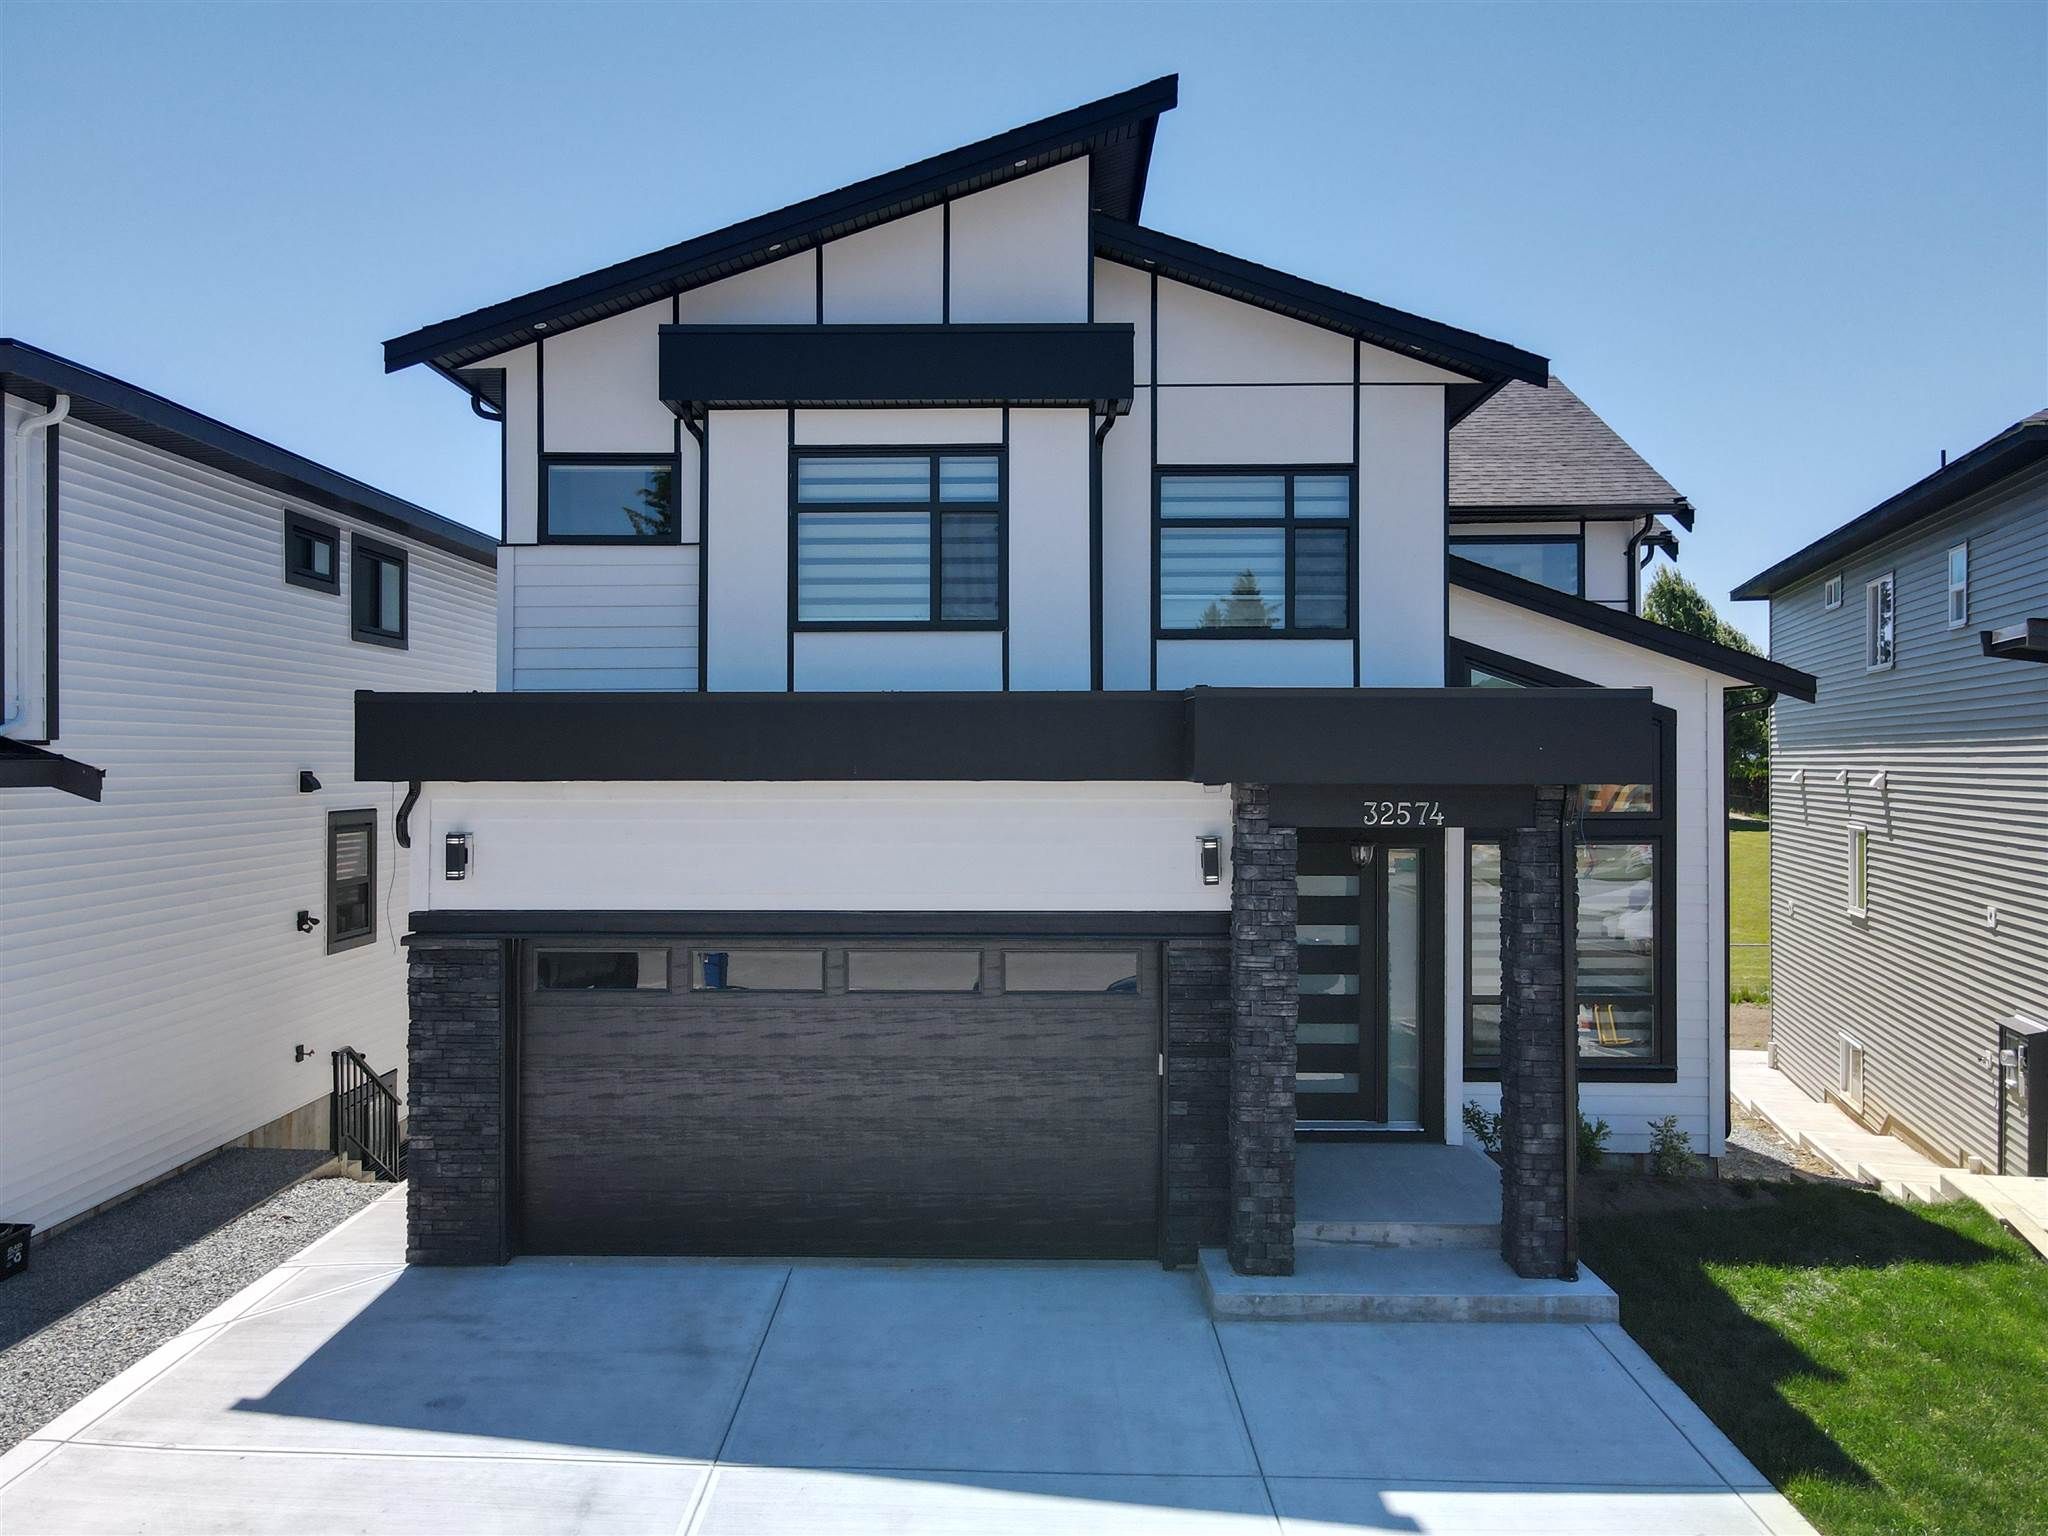 Main Photo: 32574 LISSIMORE Avenue in Mission: Mission BC House for sale : MLS®# R2596422